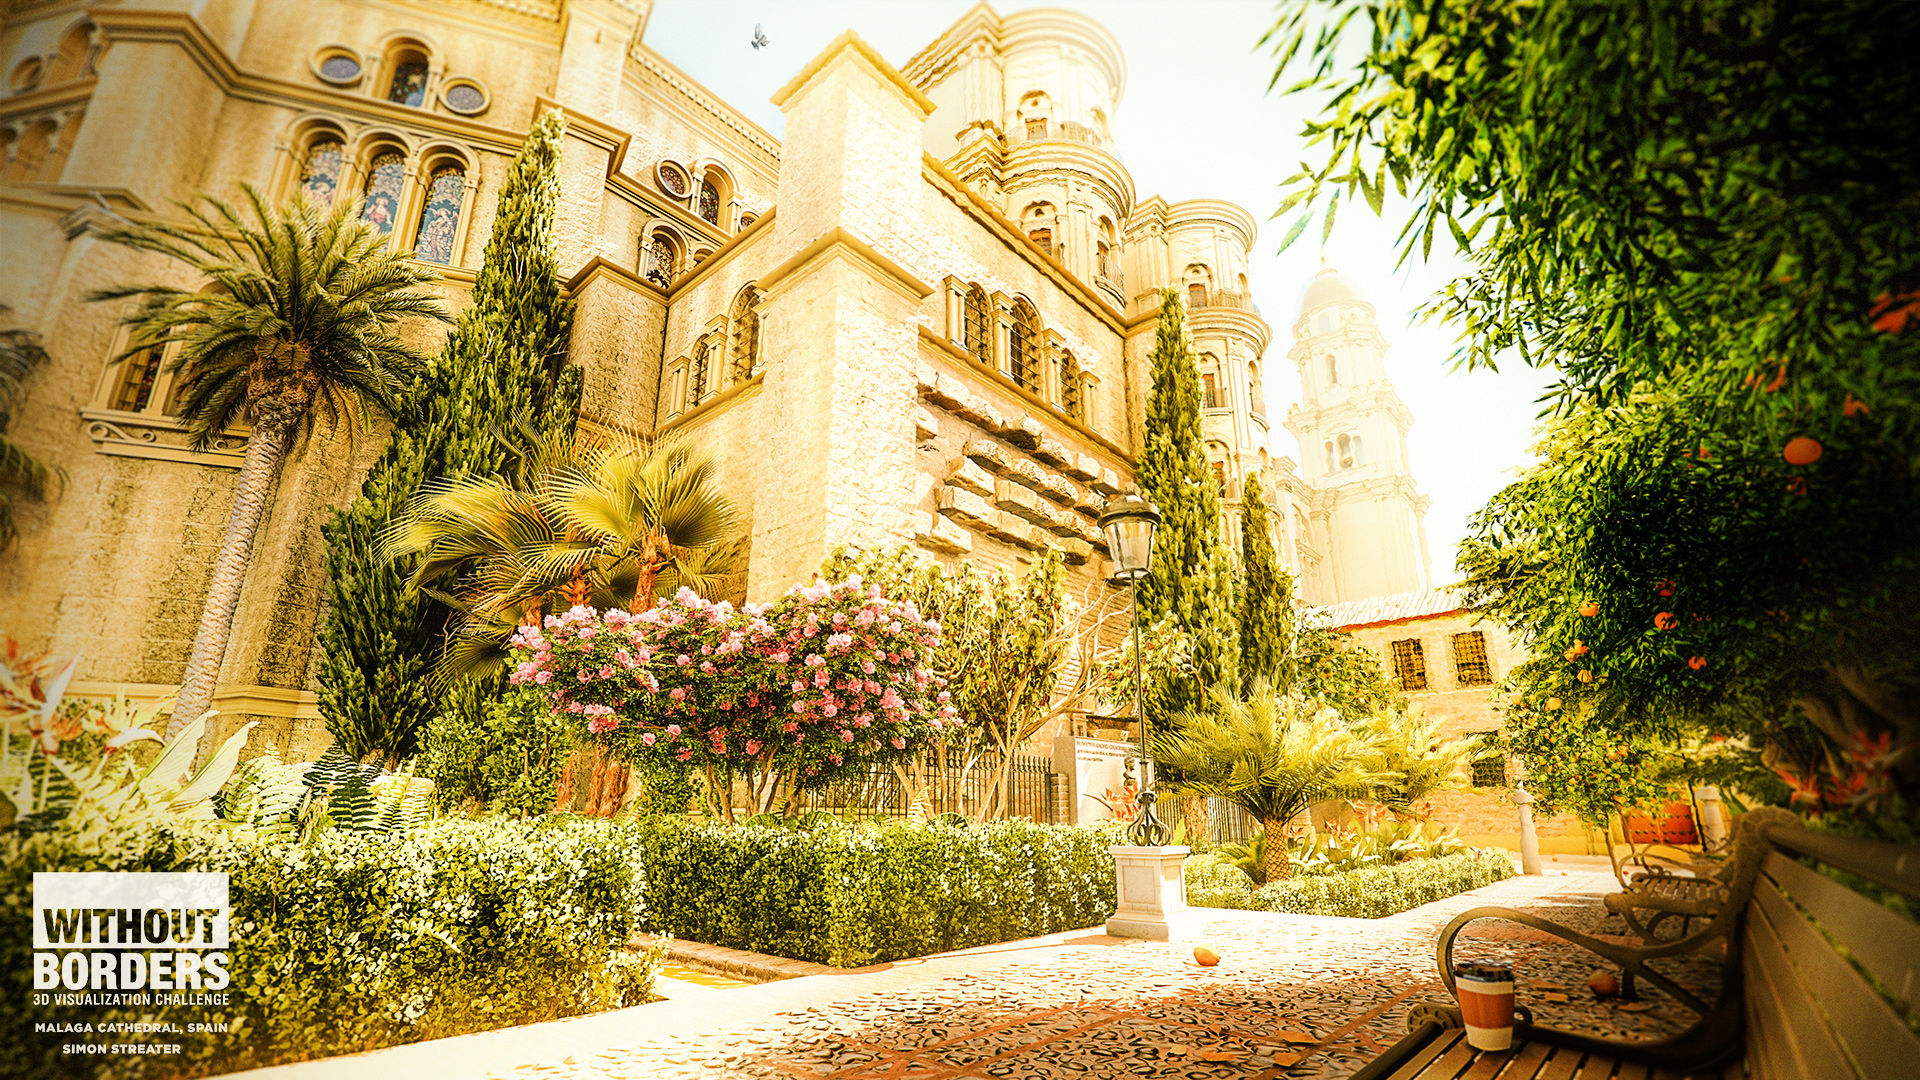 Malaga Cathedral Gardens (Andalucia, Spain) by Simon Streater